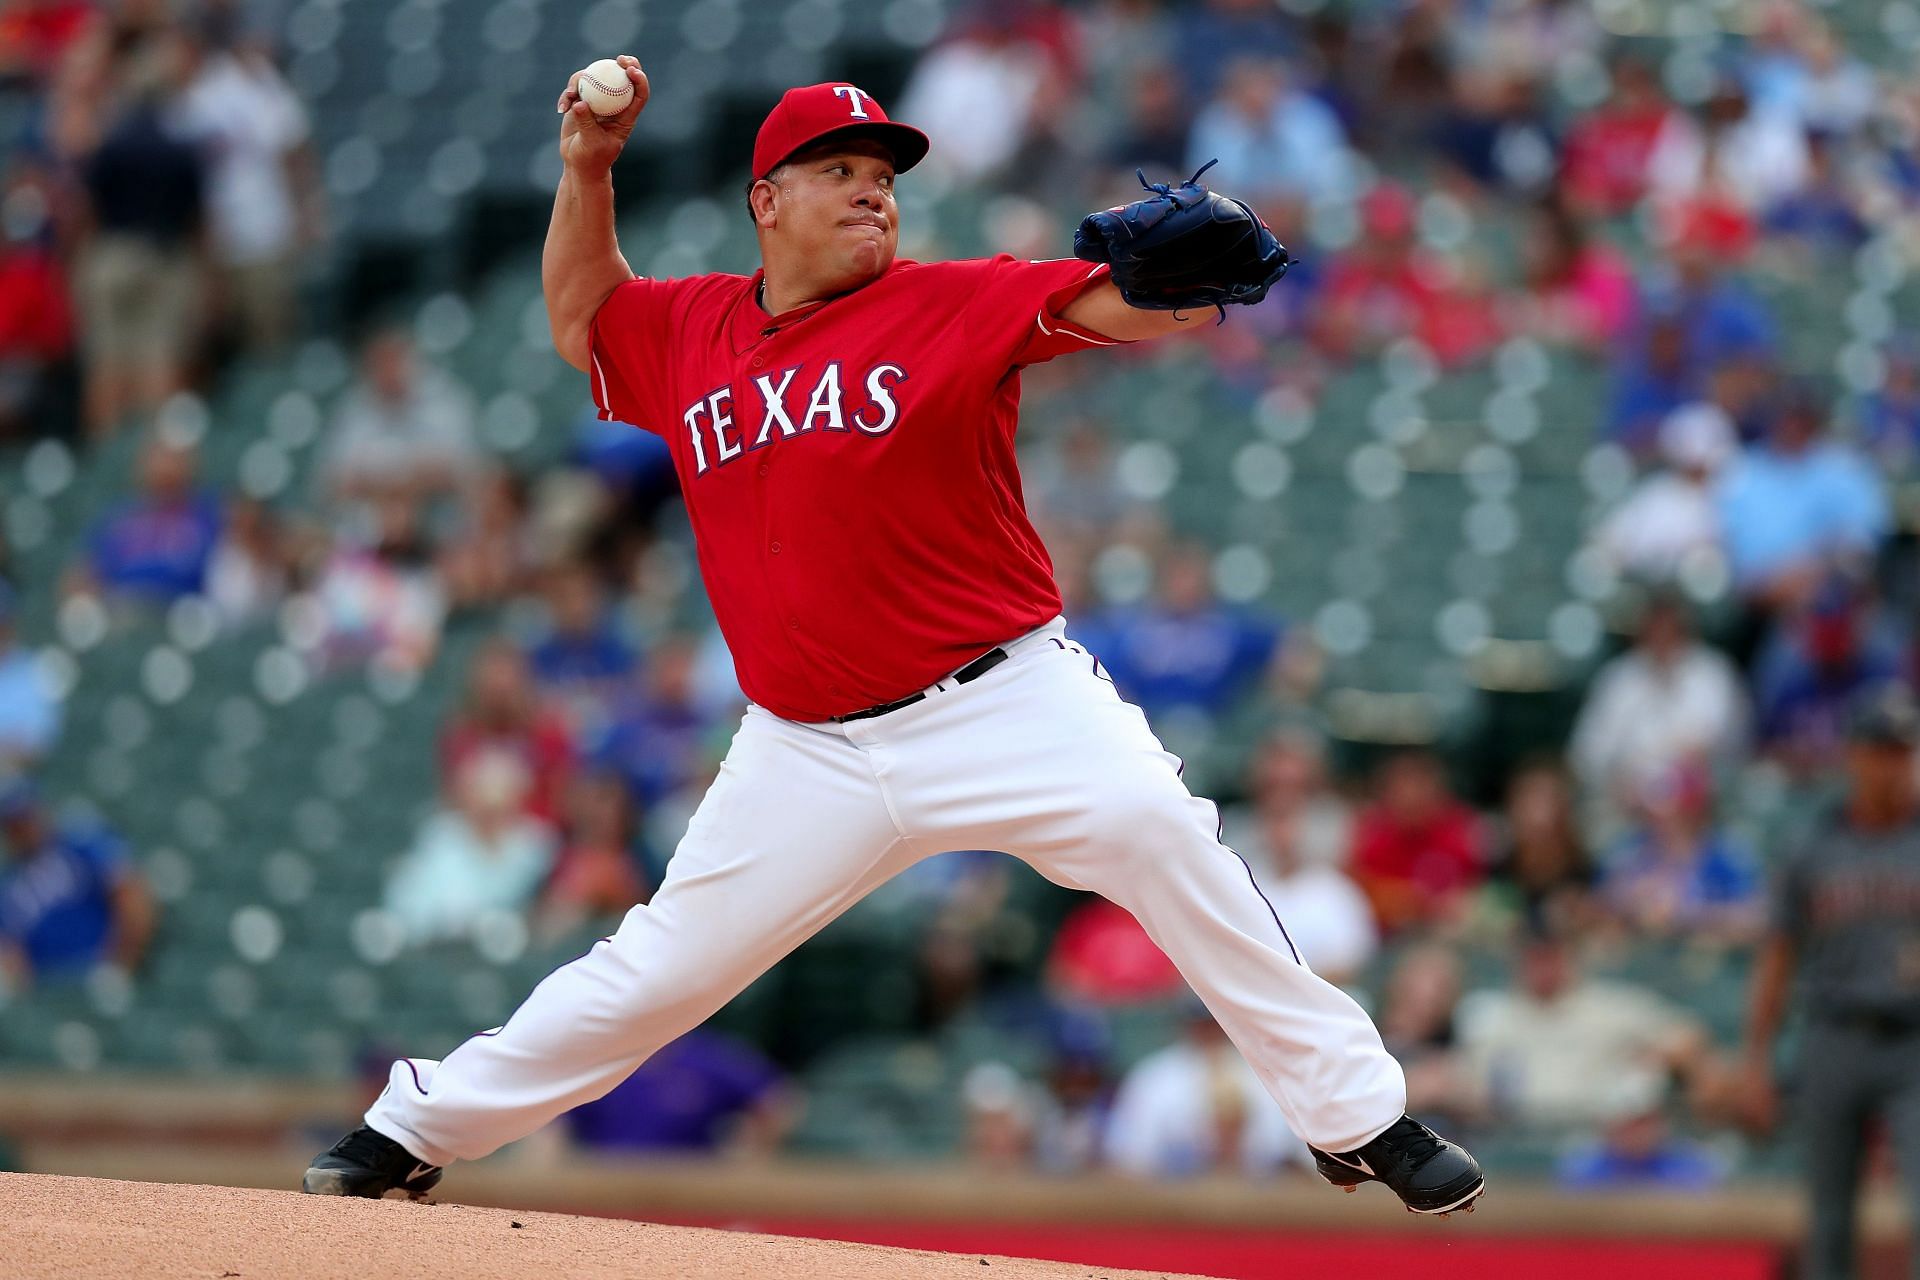 This pitcher makes Bartolo Colon look like an underwear model. The